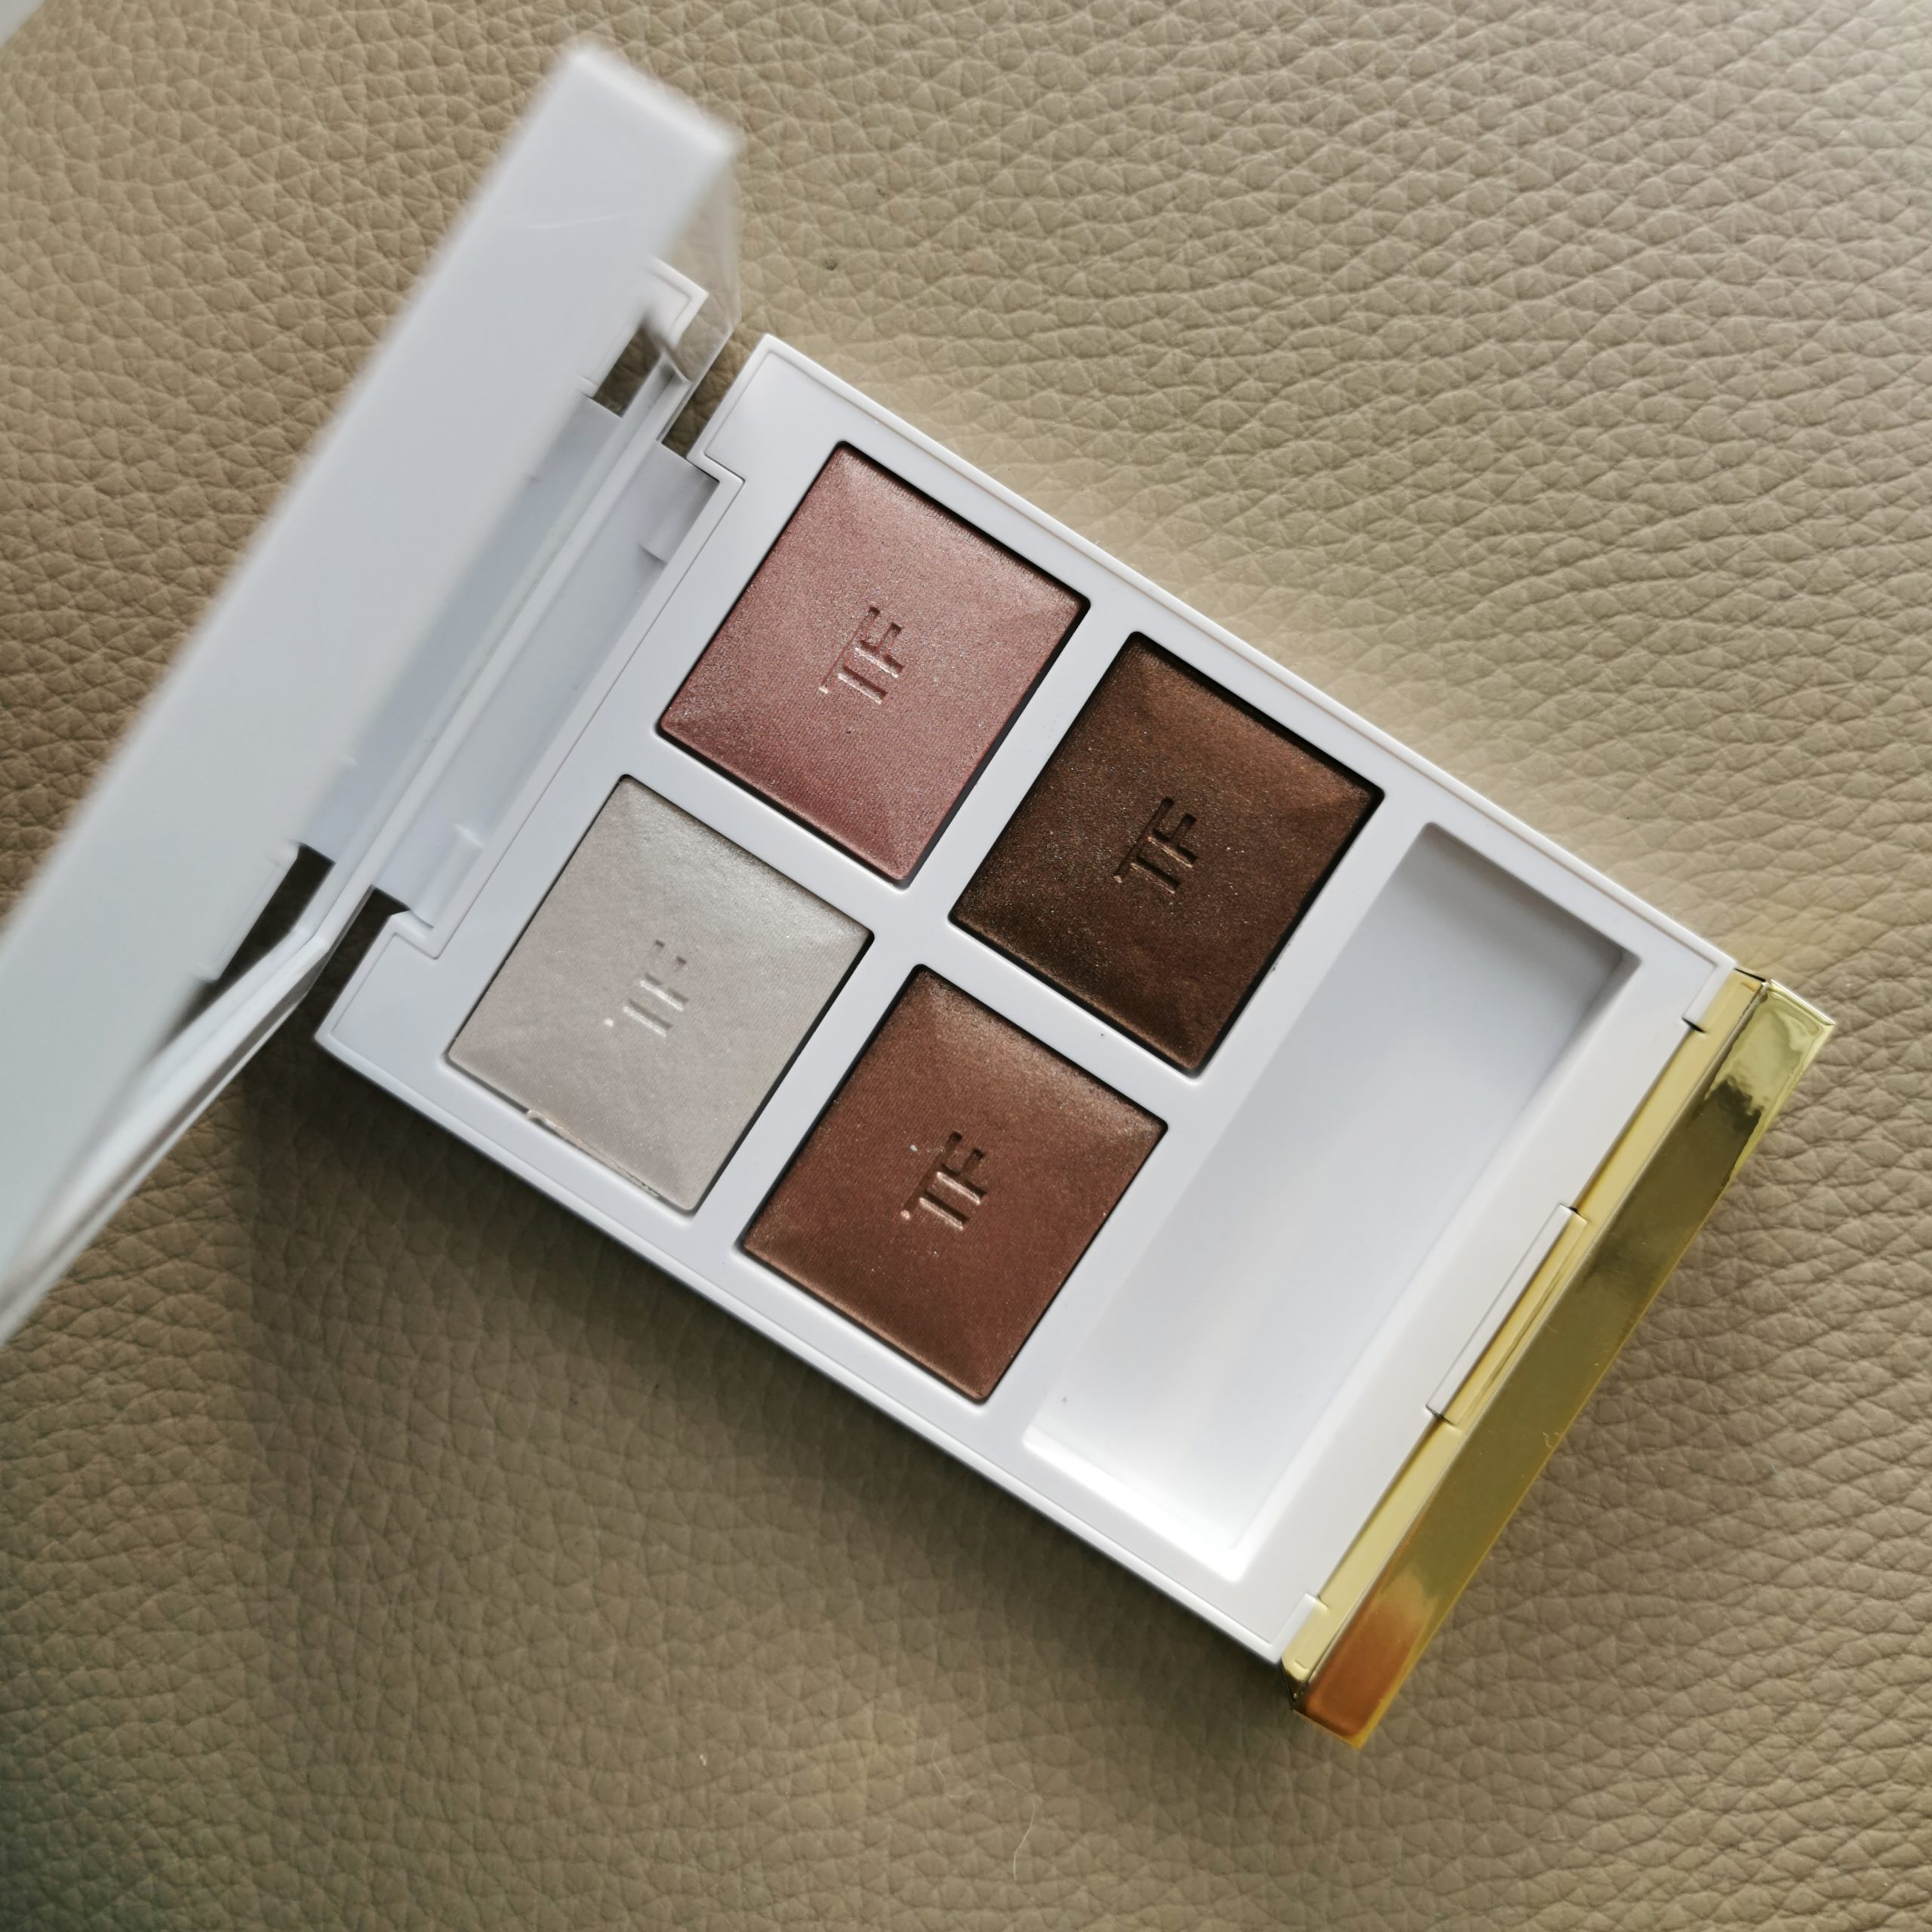 Tom Ford First Frost 04: Review and Swatches